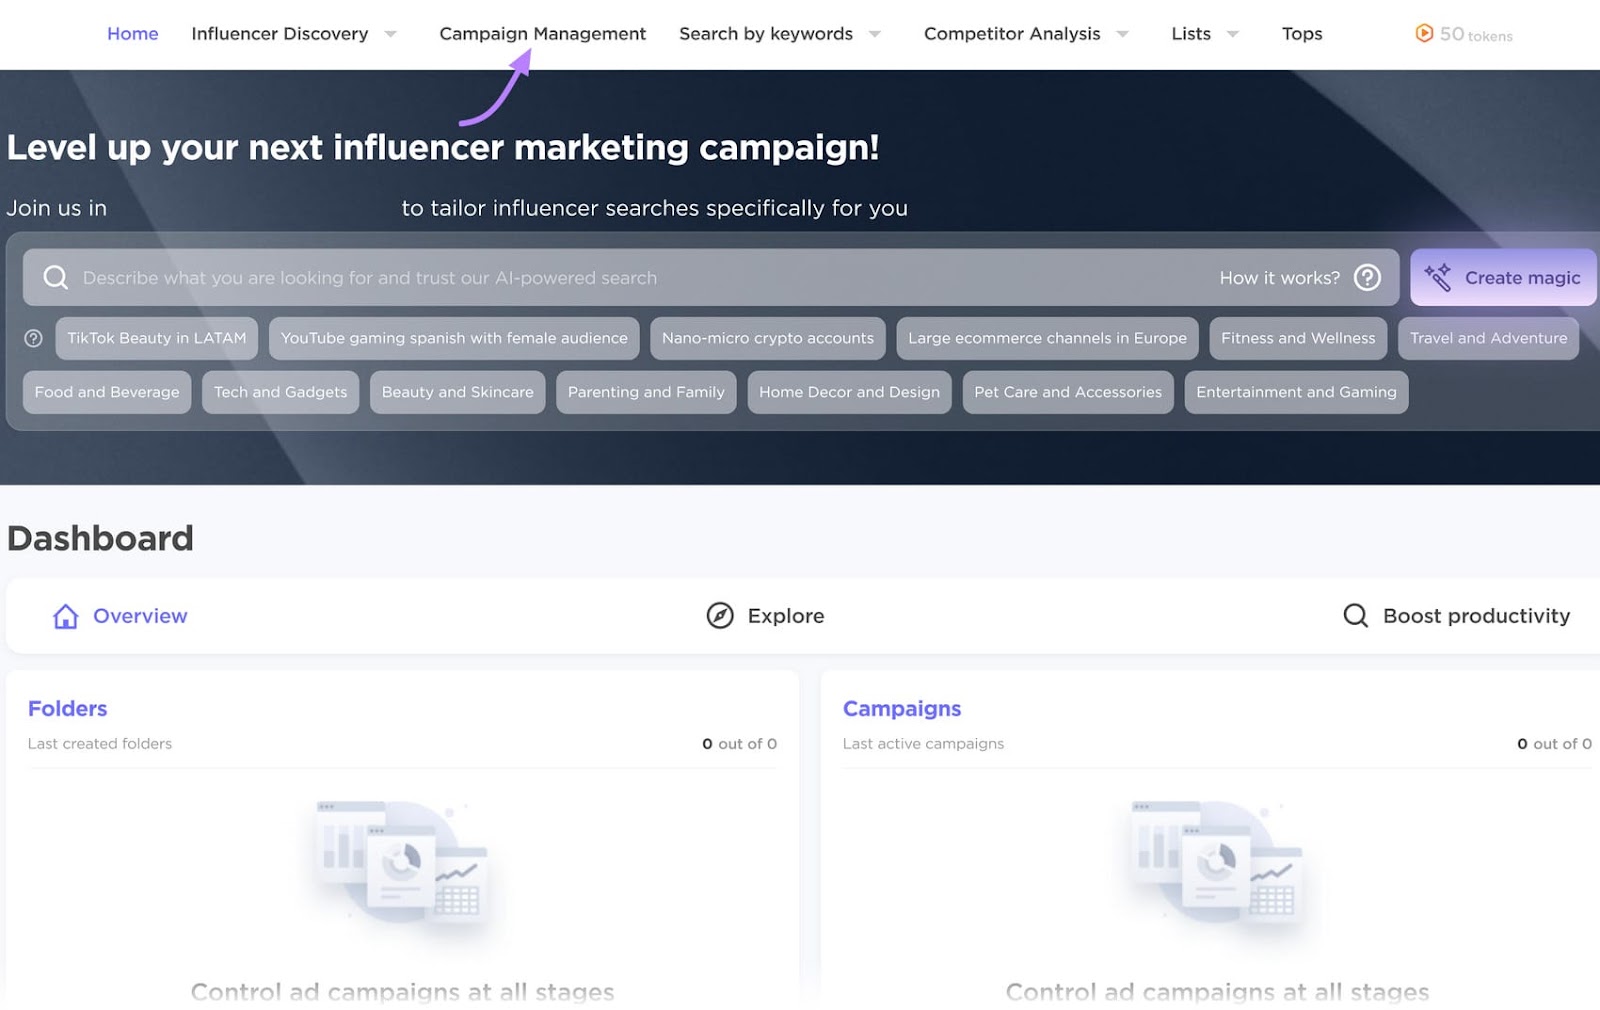 Influencer Analytics "Campaign Management" dashboard with a navigation bar, search options, and campaign sections.